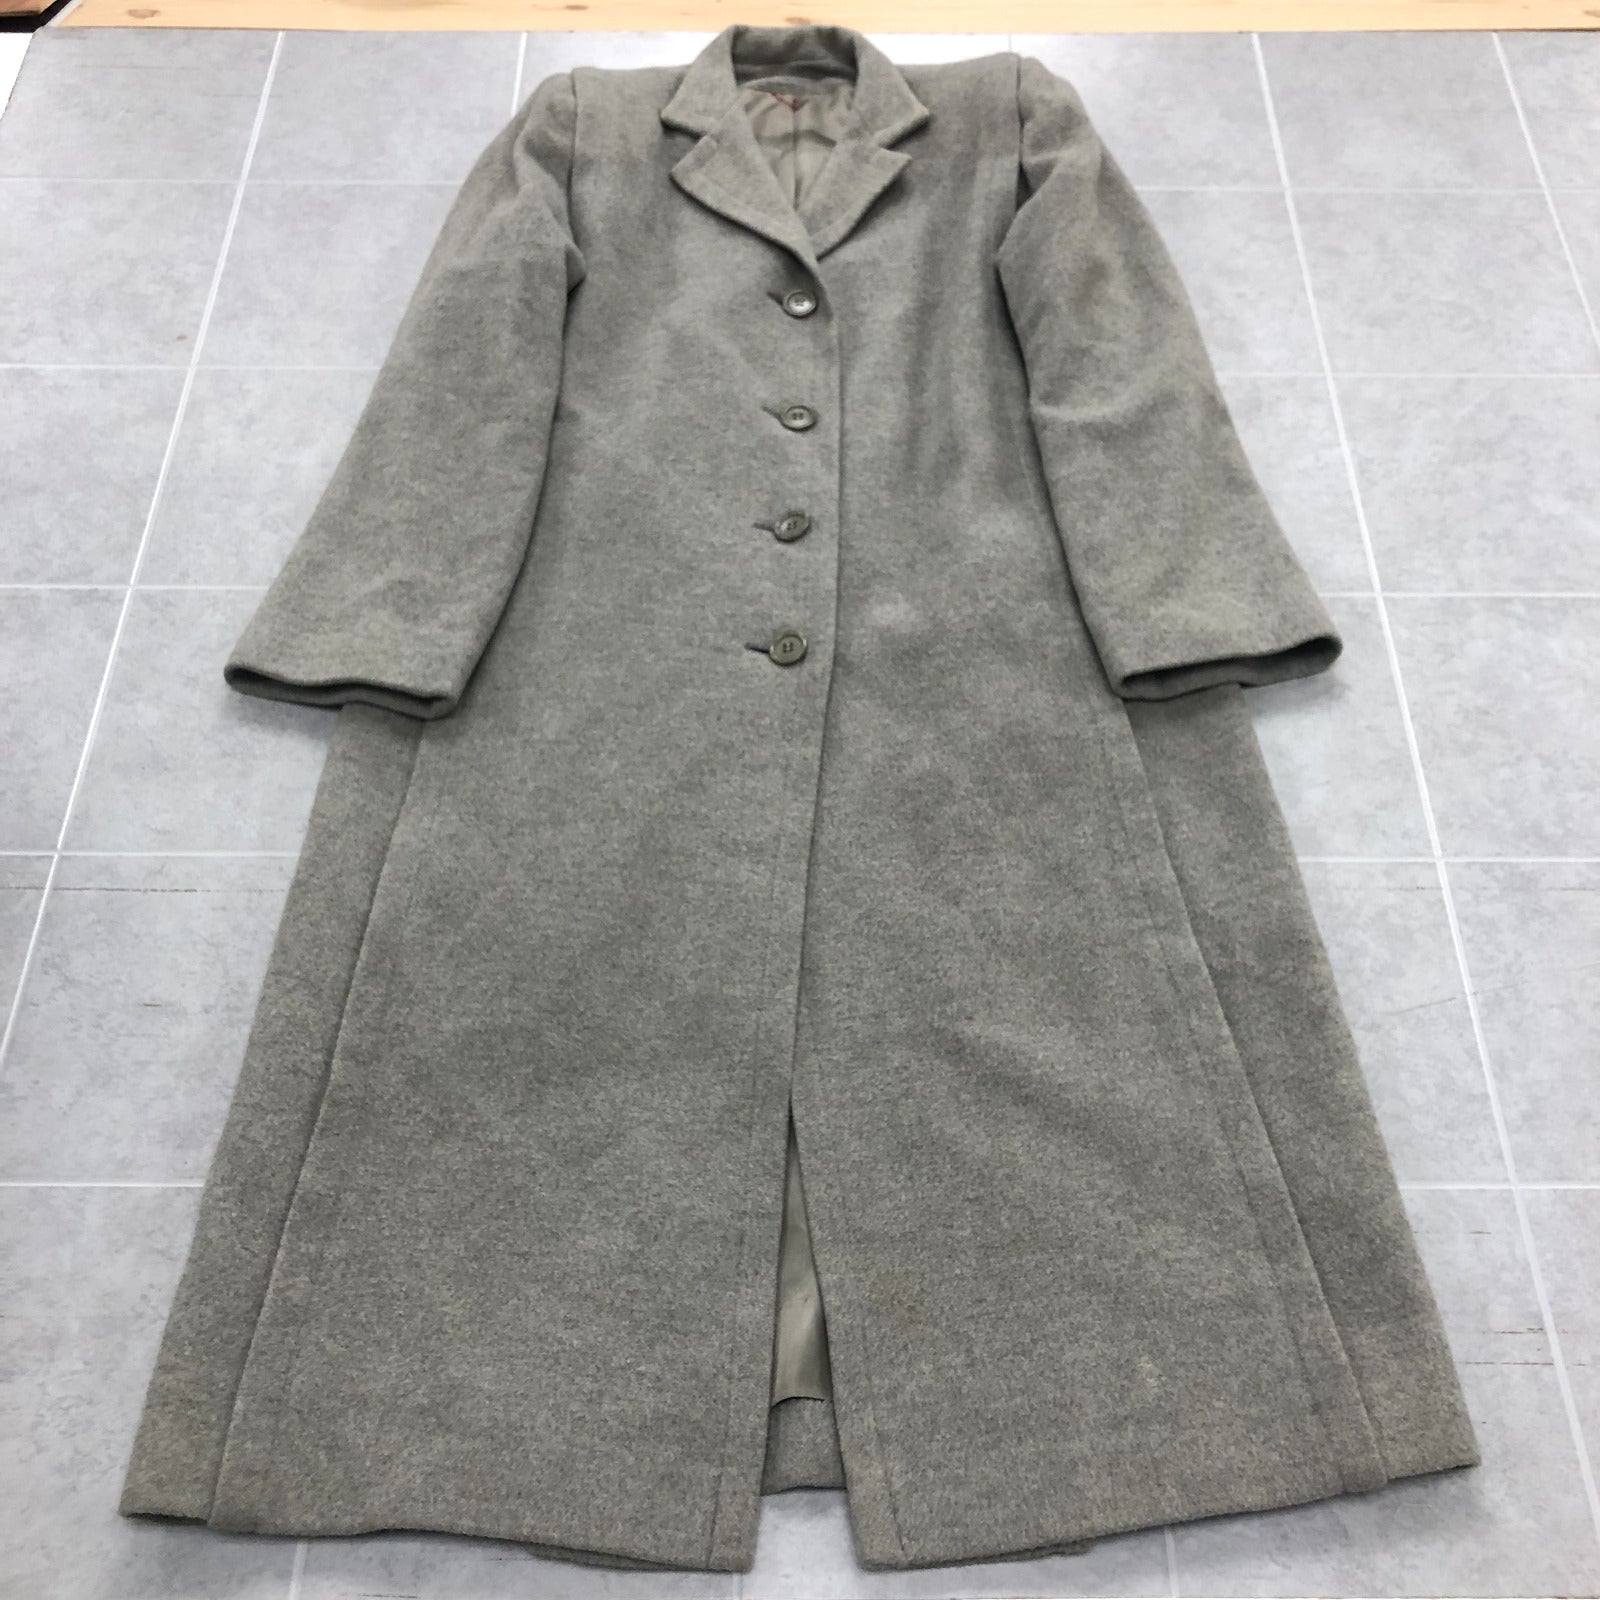 Vintage Gray Long Sleeve Lined Button Up Handmade Cashmere Coat Adult Size 38